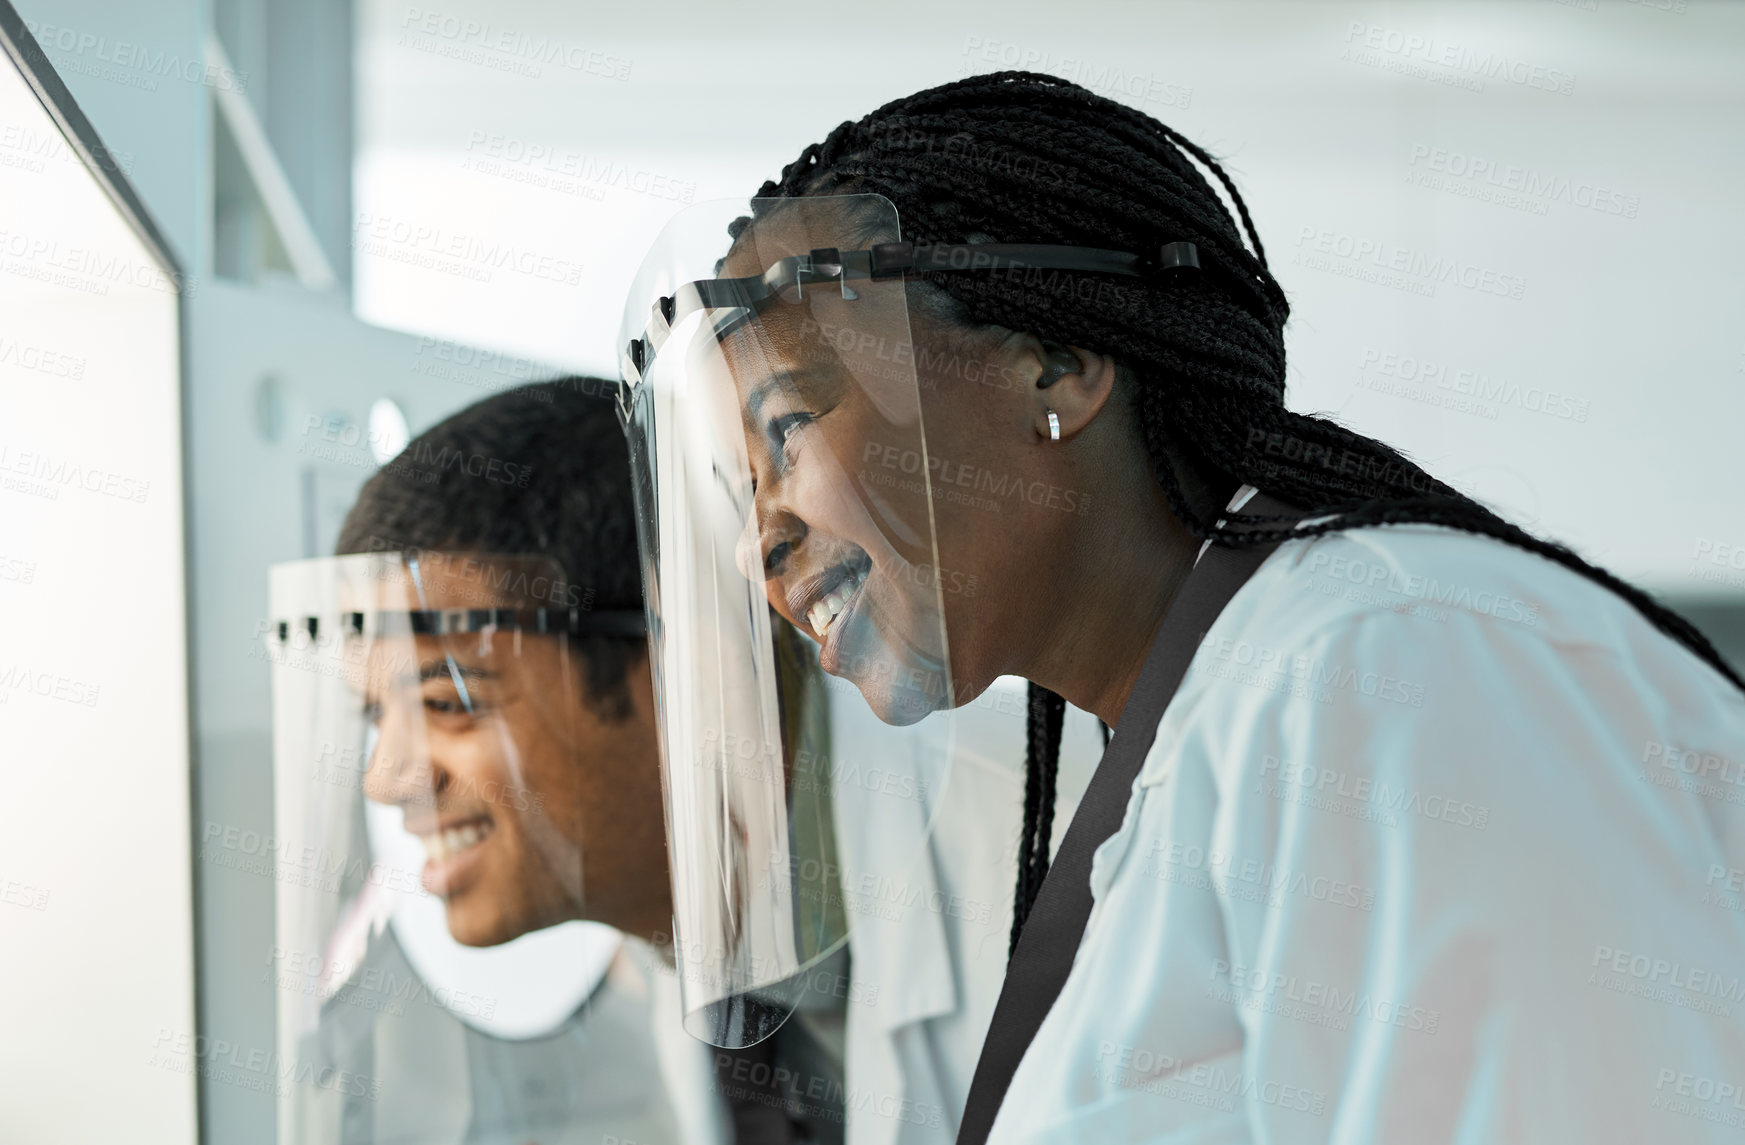 Buy stock photo Shot of two scientists wearing face shields while working together in a lab